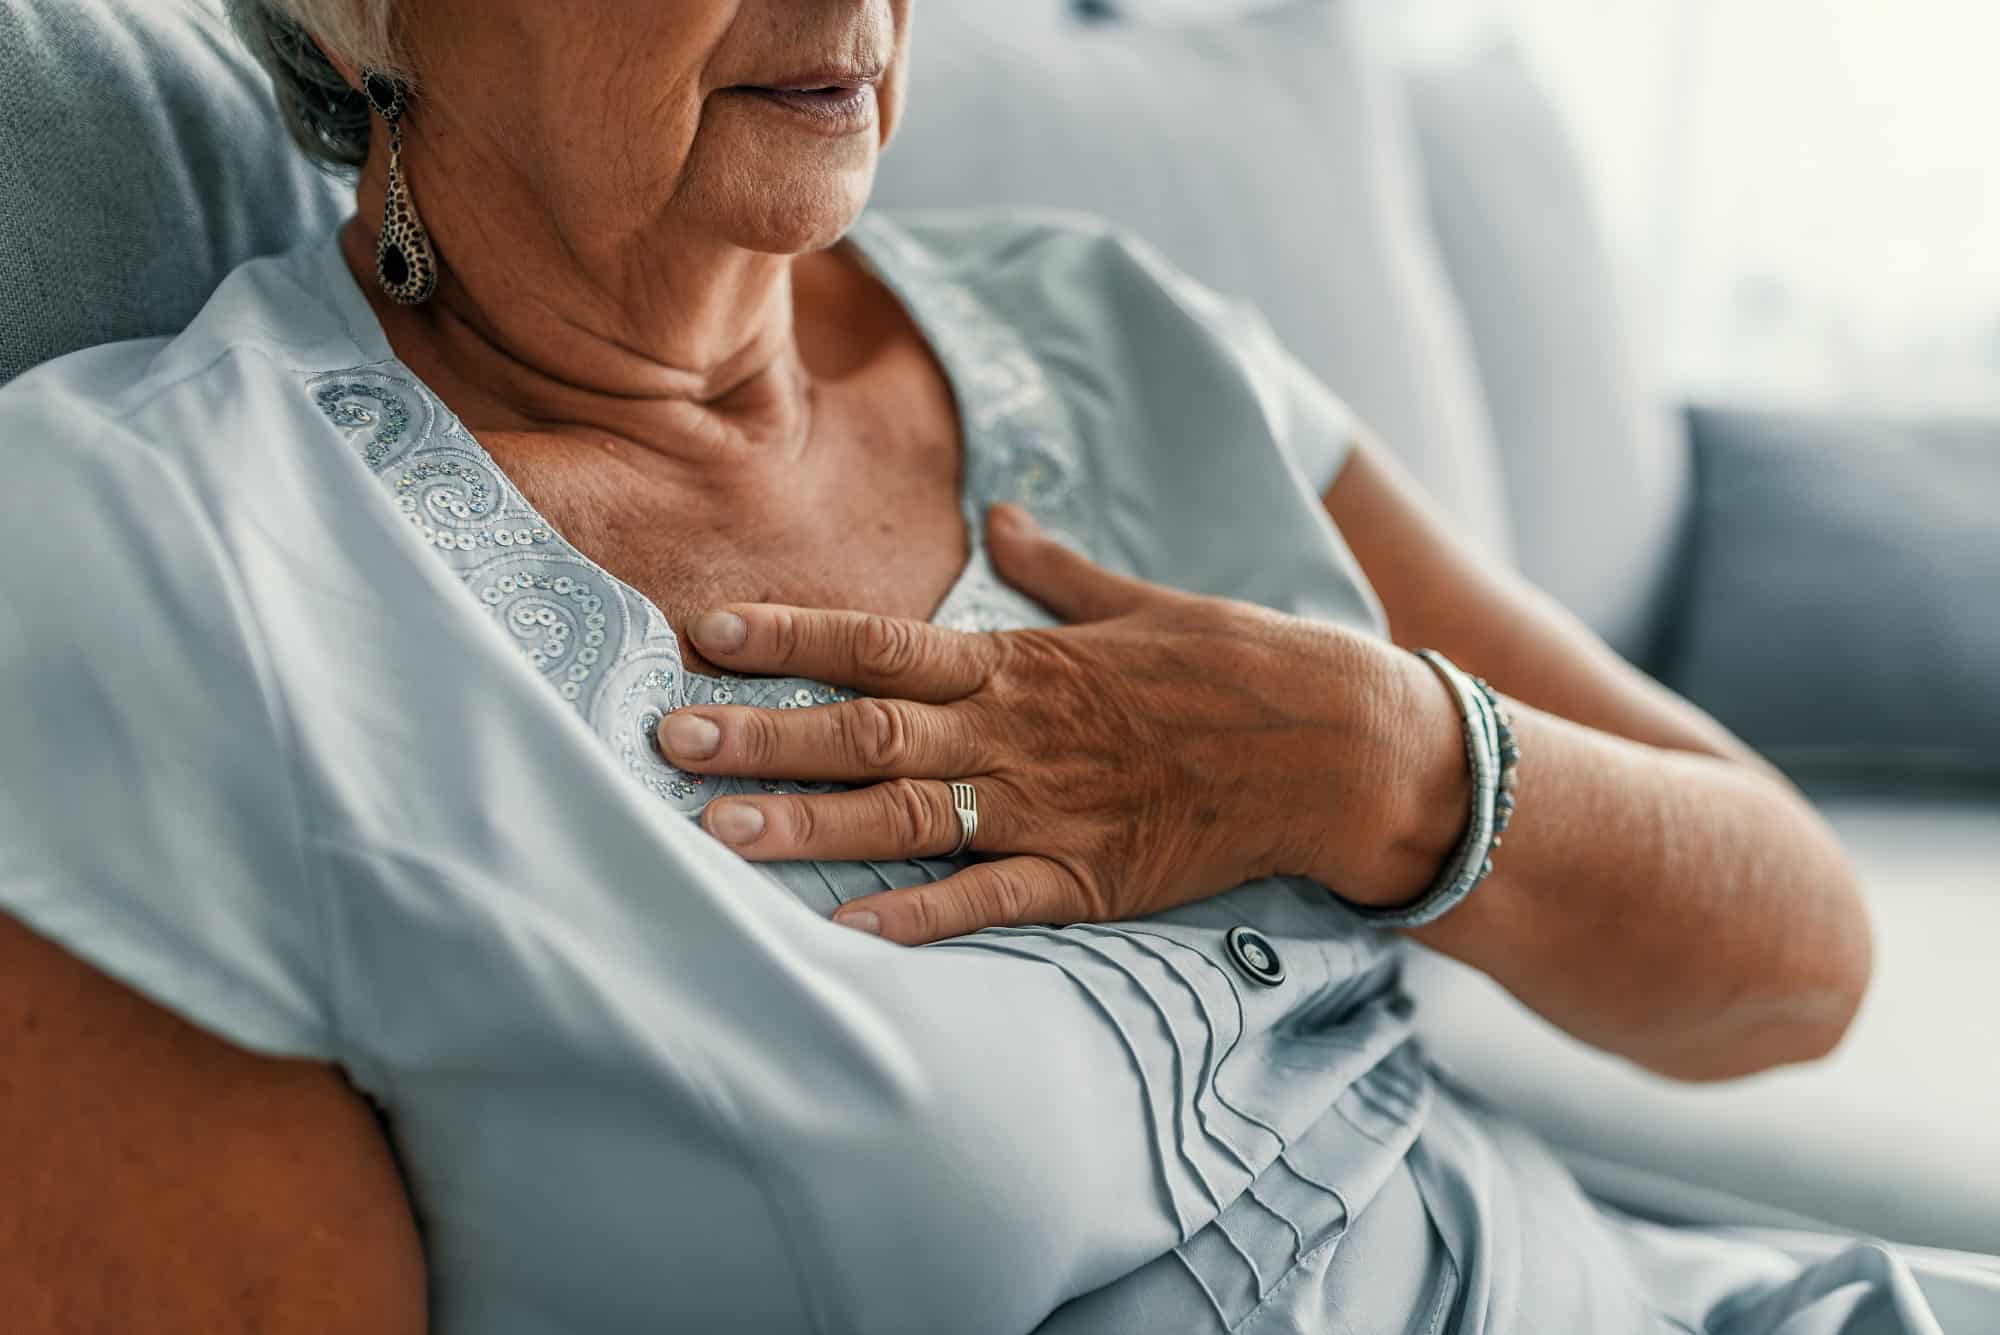 An older woman clutches her hand to her chest in pain